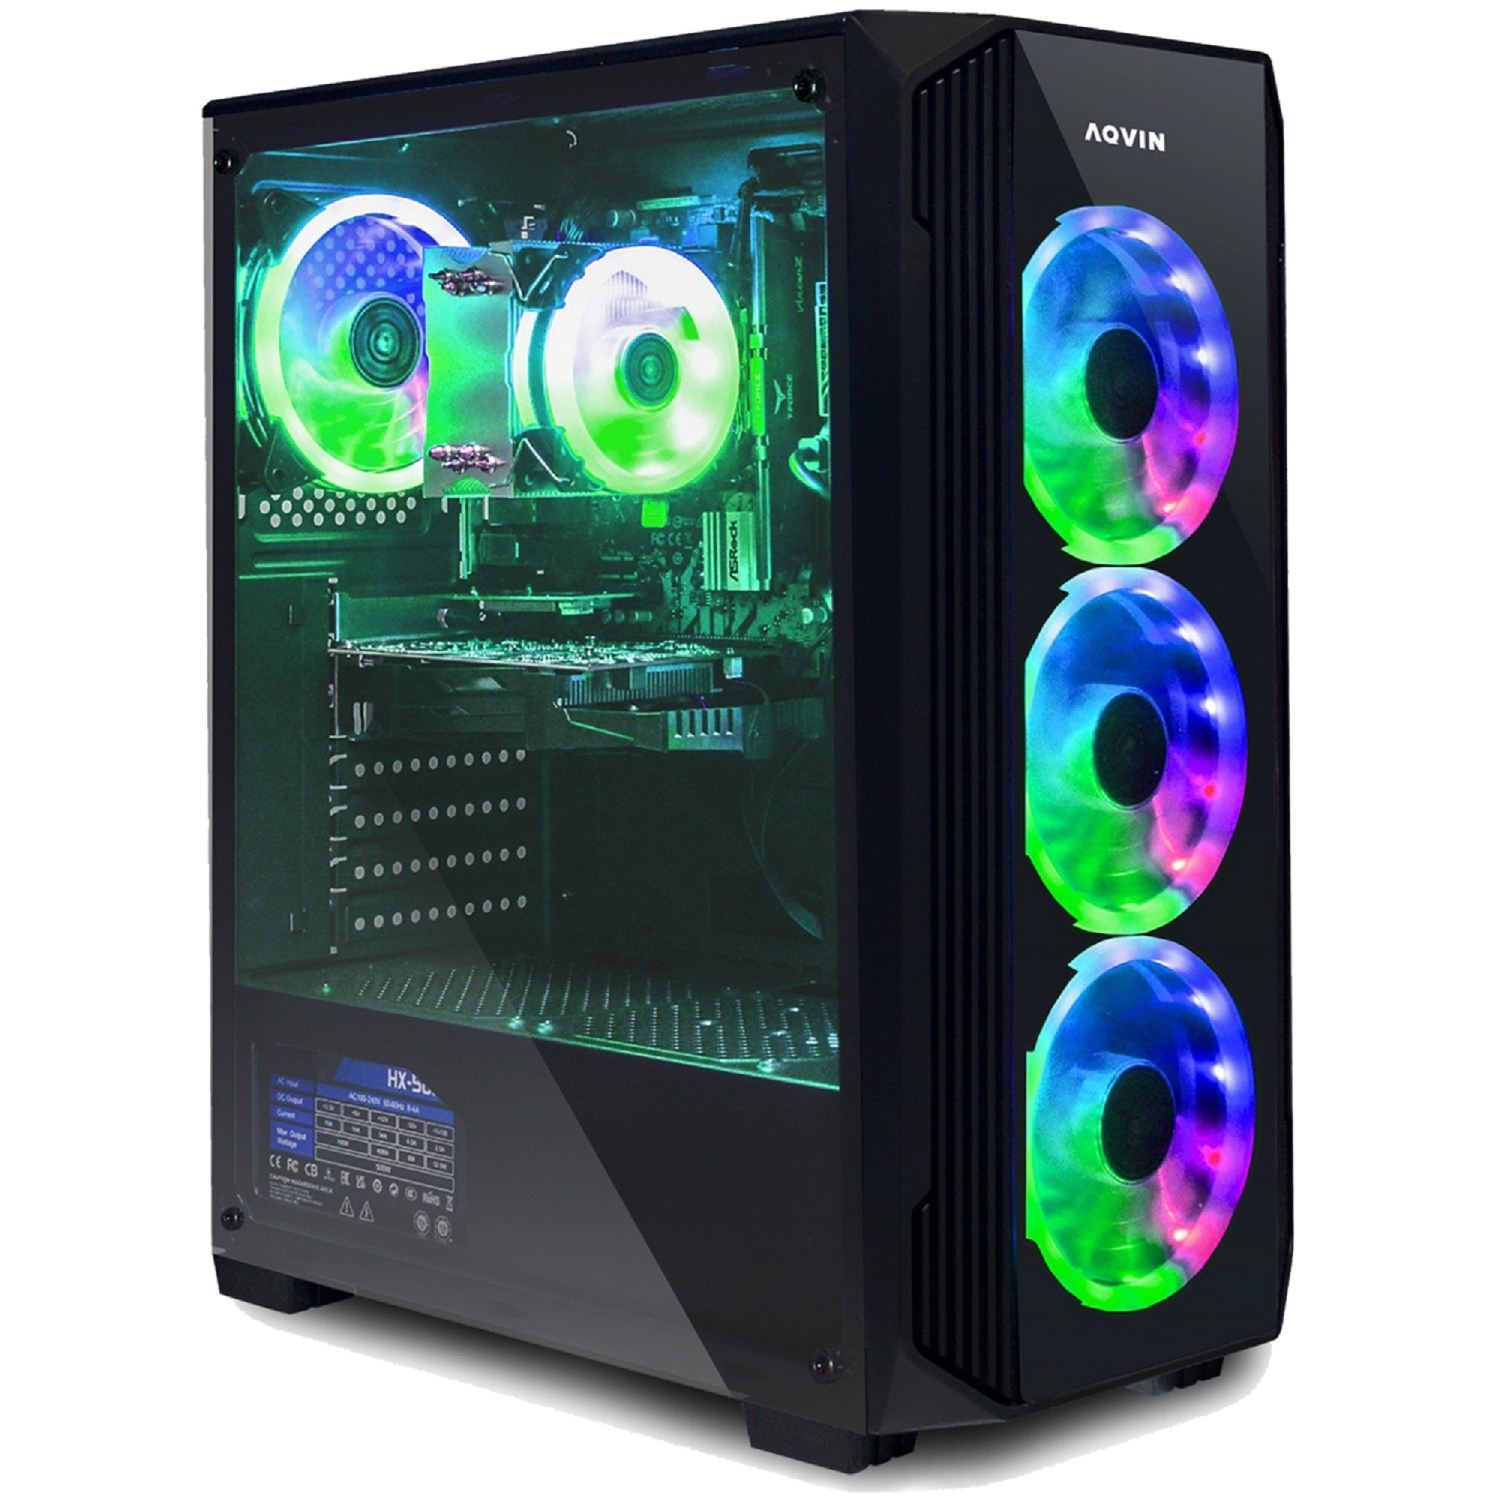 AQVIN ZForce Gaming PC Tower Desktop Computer Intel Core i5 up to 4.00 GHz 32GB DDR4 RAM 2TB SSD Storage GeForce RTX 3050 8GB Windows 11 Gaming Keyboard and Mouse WIFI